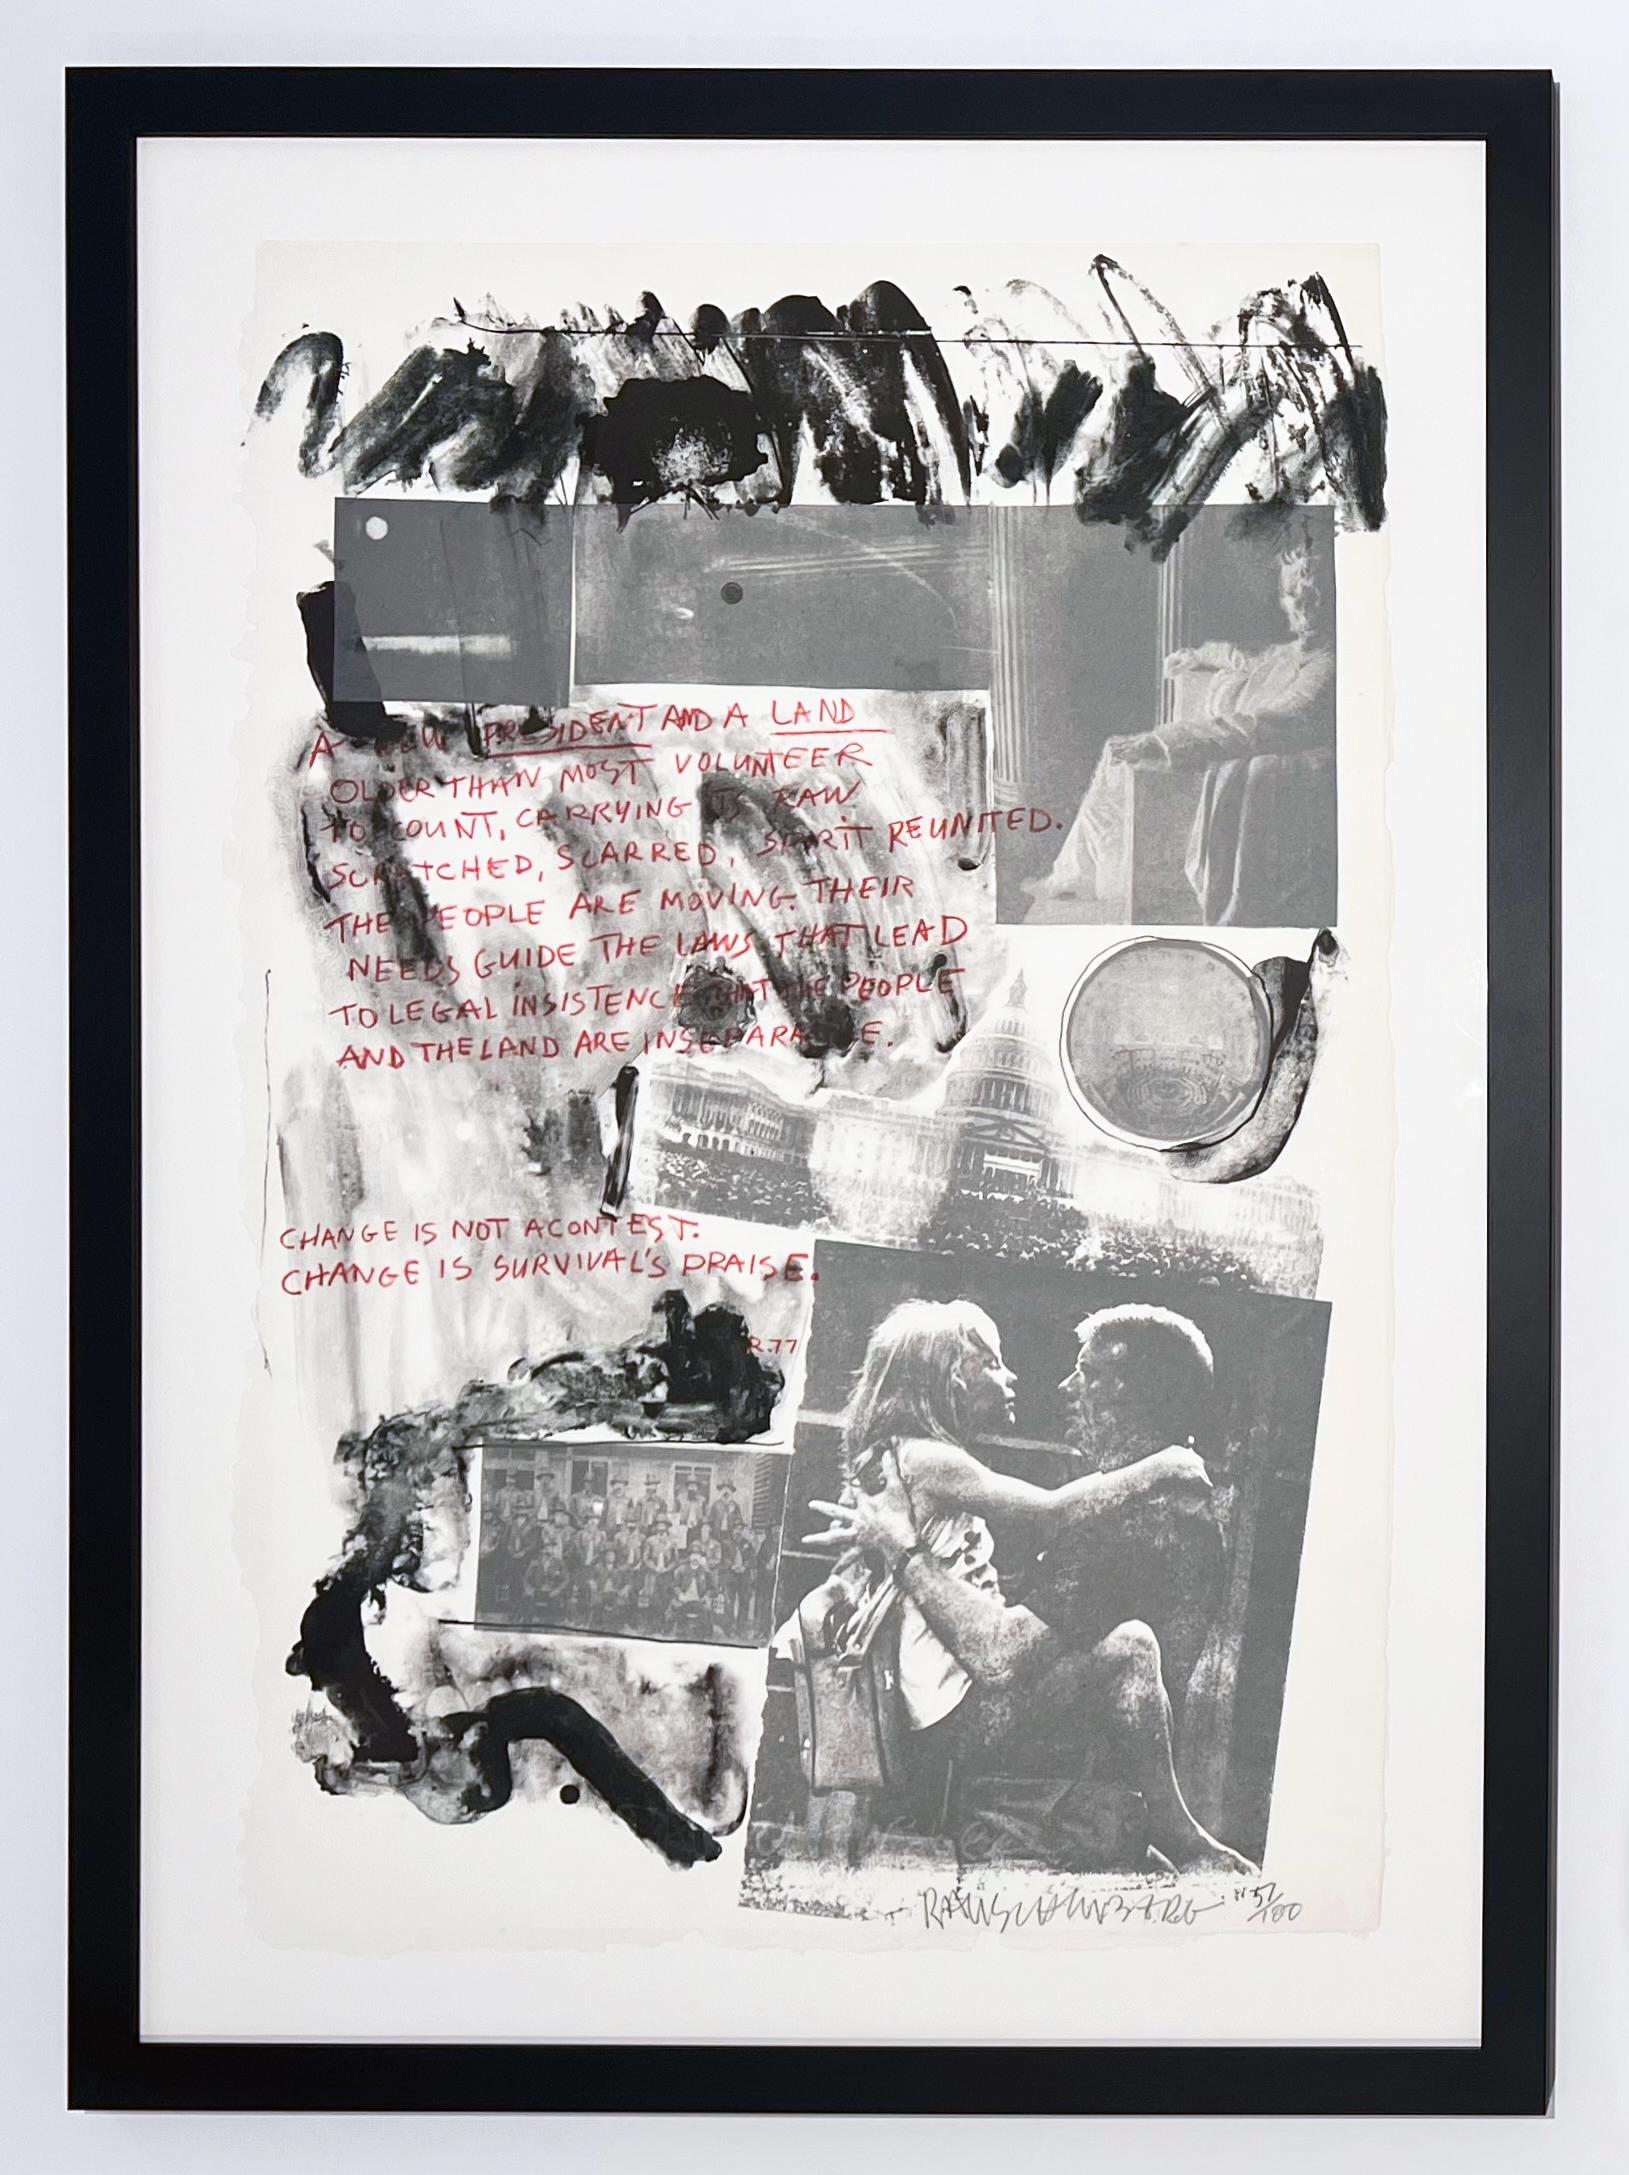 1977 Presidential Inauguration, from Inaugural Impressions - Print by Robert Rauschenberg